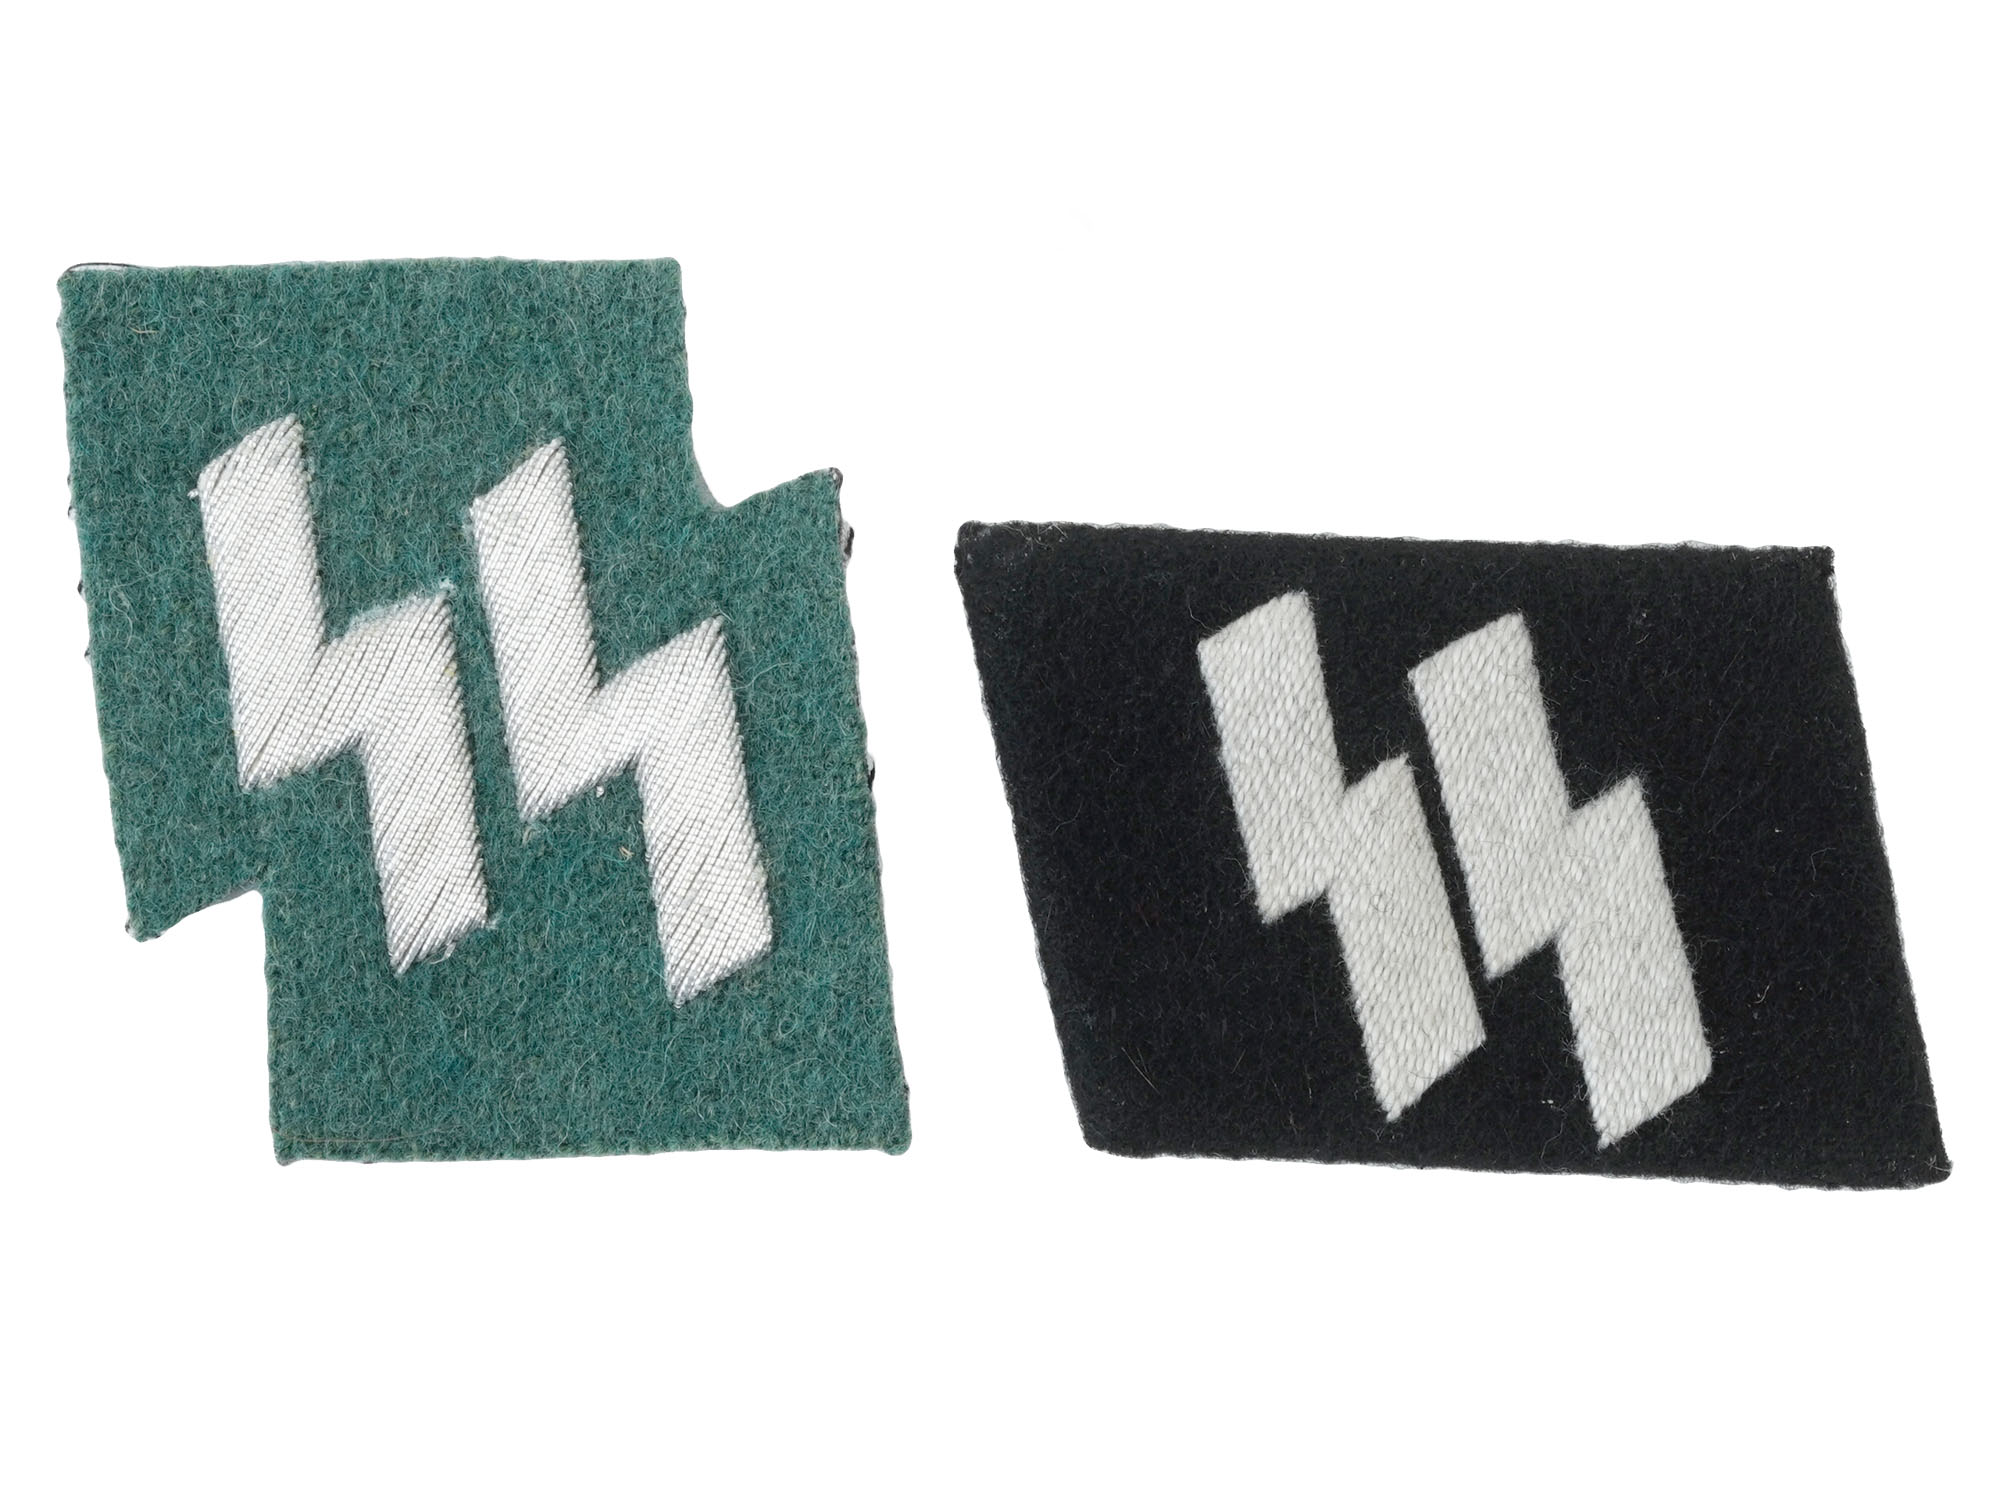 WWII NAZI GERMAN FABRIC UNIFORM PATCHES 15 ITEMS PIC-2